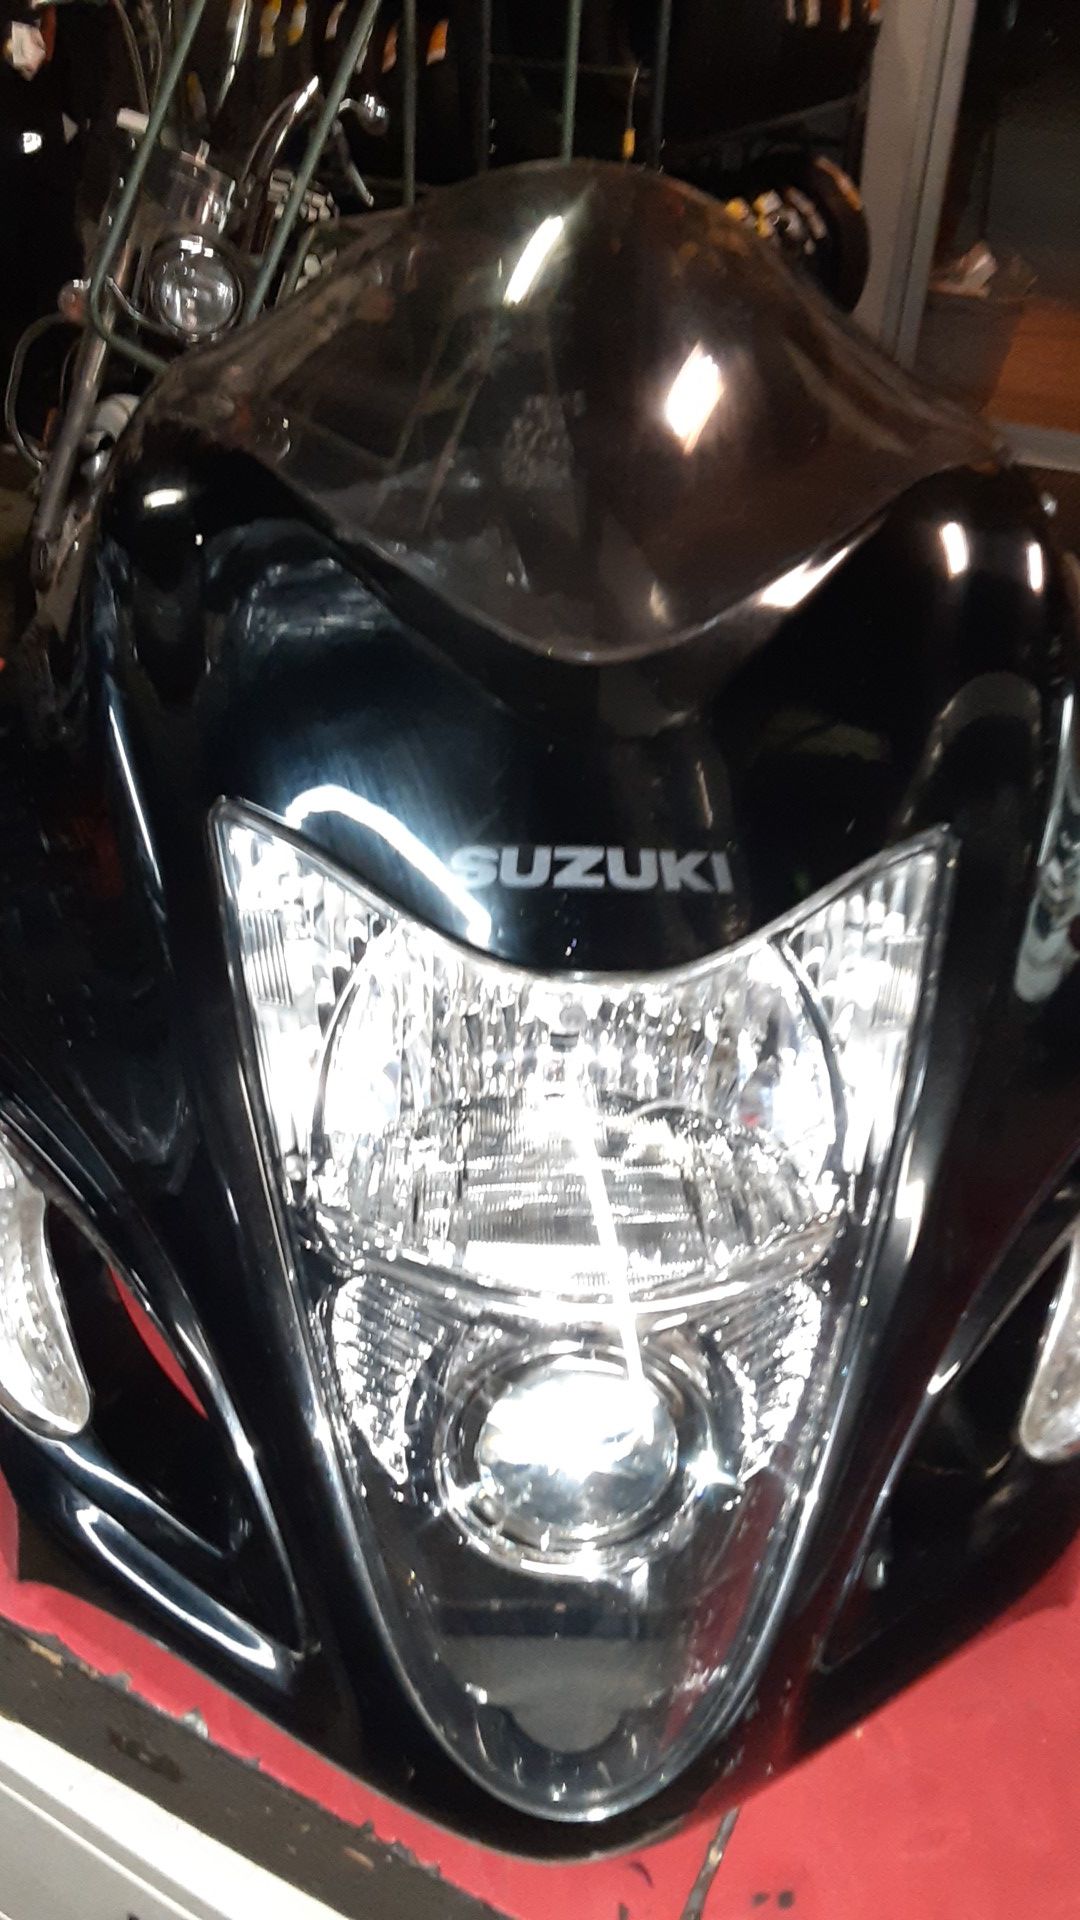 2008 and up Suzuki Hyabusa complete front clip